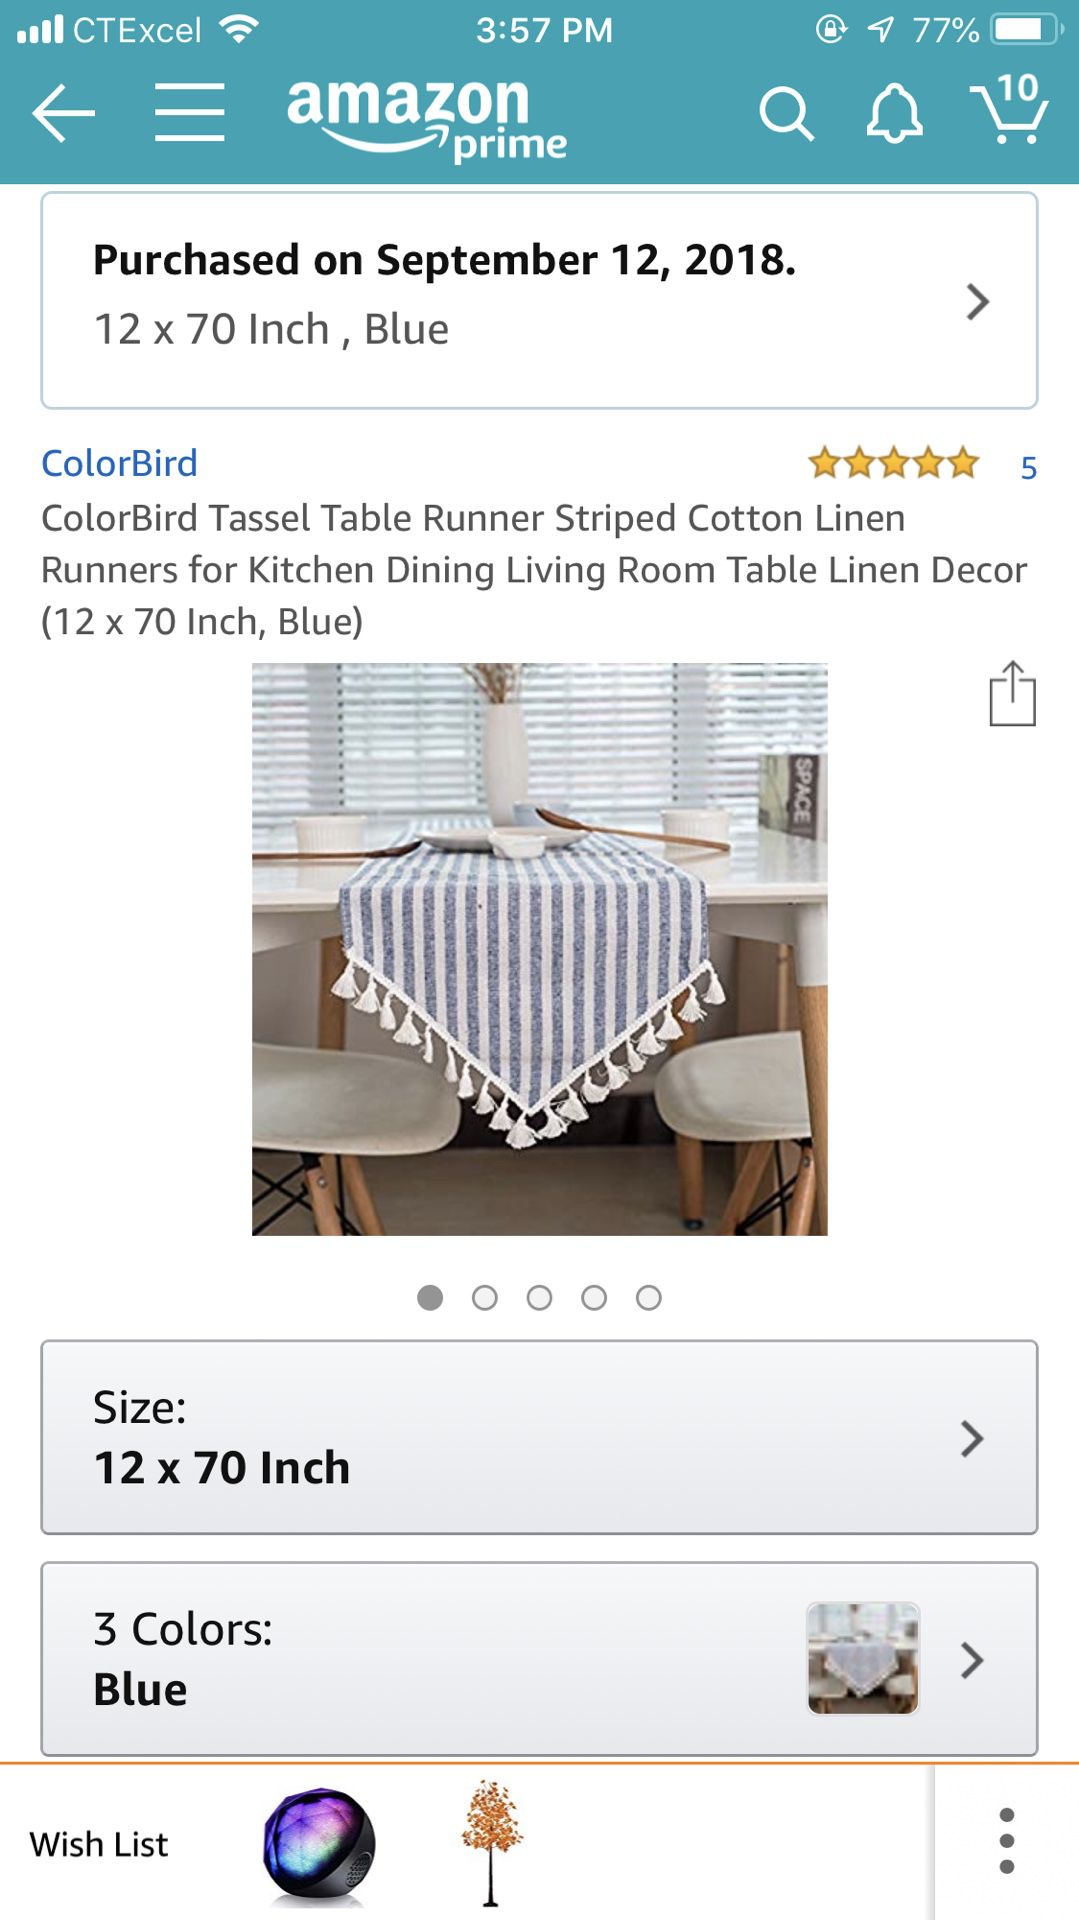 ColorBird Tassel Table Runner Striped Cotton Linen Runners for Kitchen Dining Living Room Table Linen Decor (12 x 70 Inch, Blue)